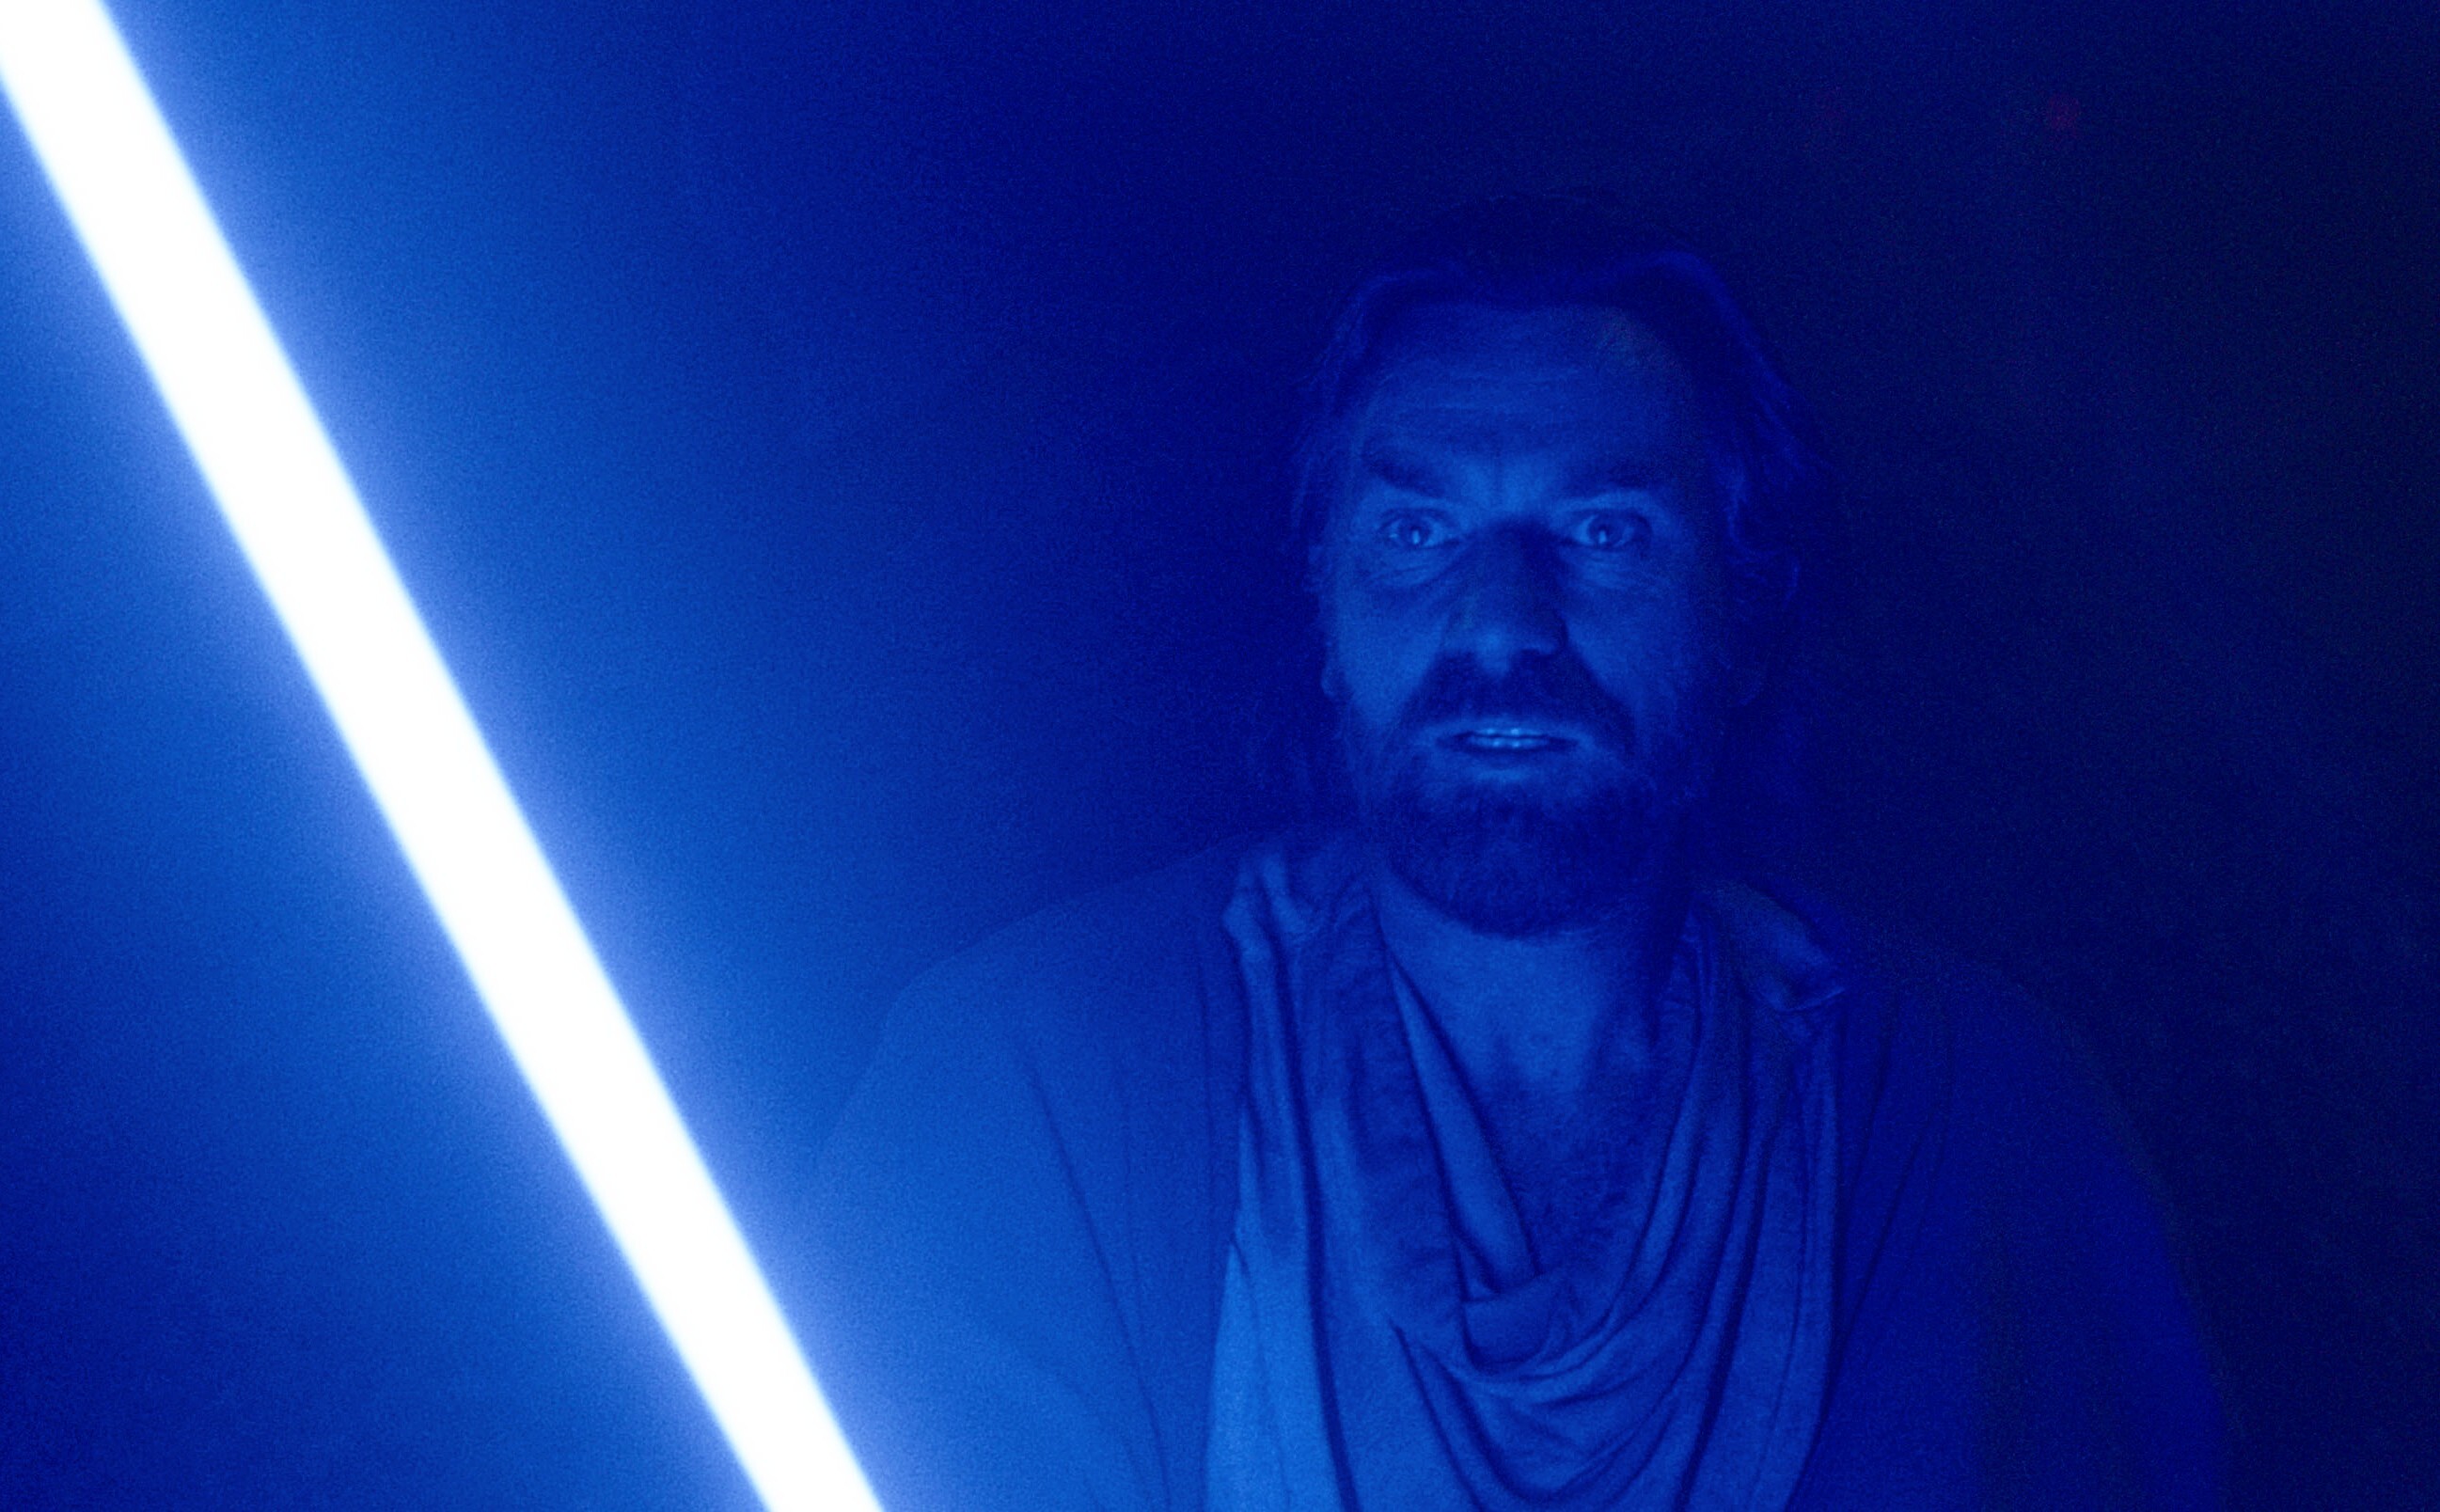 Looks Like Obi-Wan Kenobi's Big Episode 3 Appearance May Have Been Helped  By Star Wars Magic